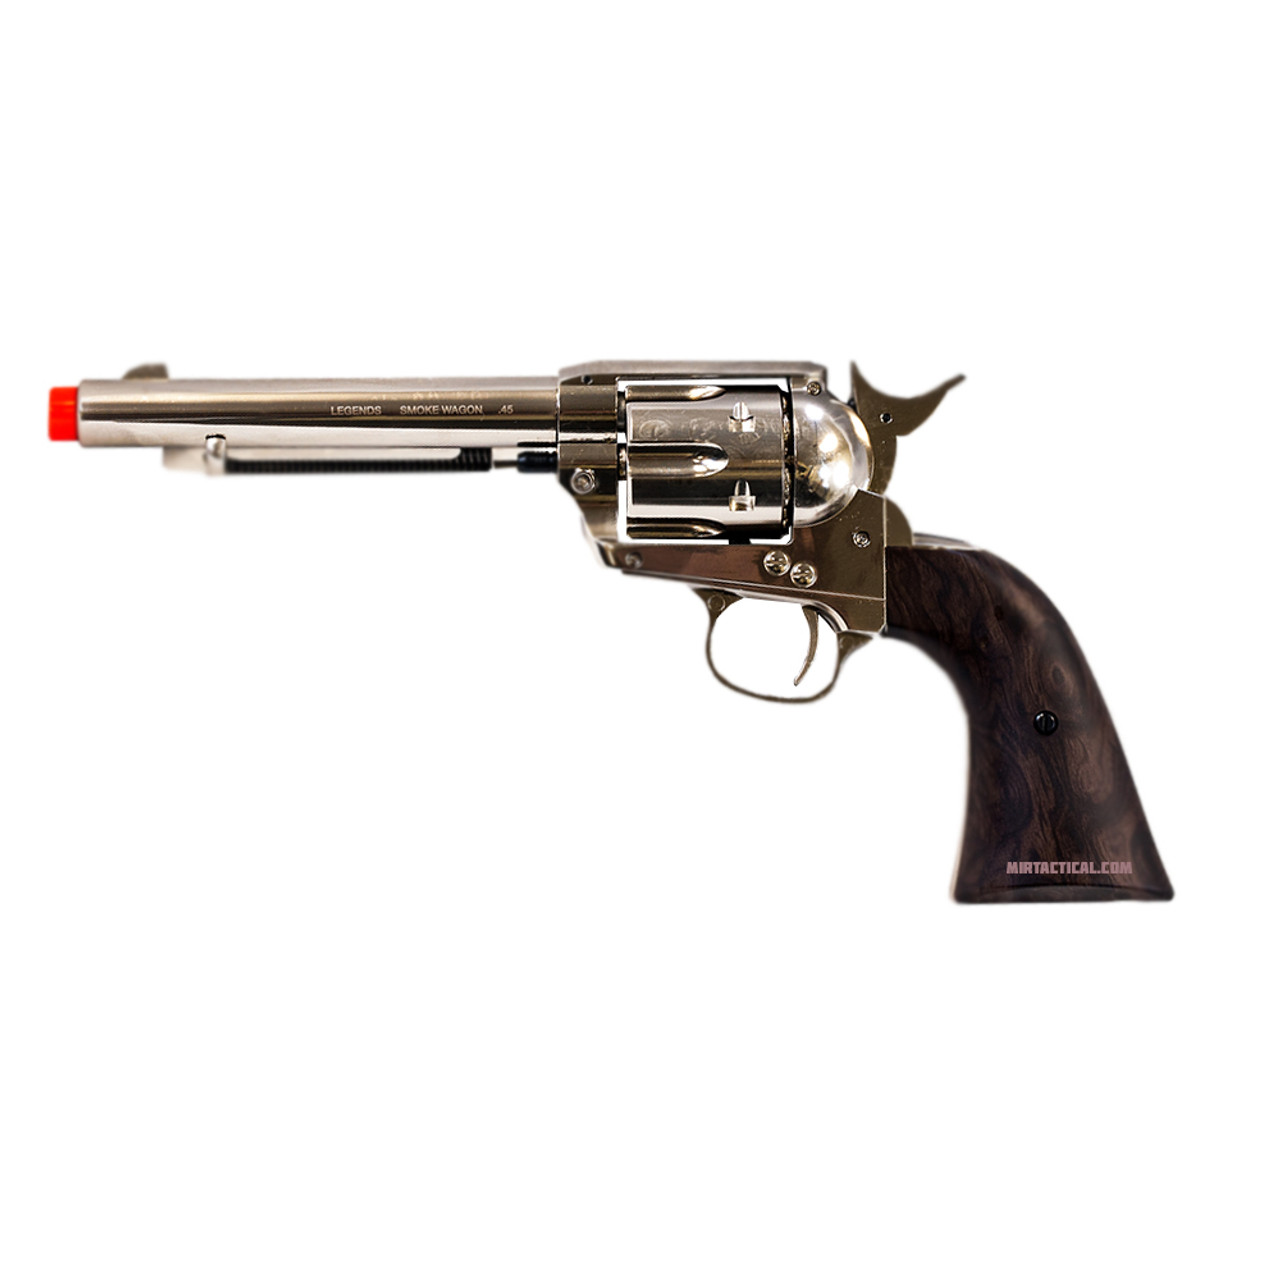 Legends Smokewagon CO2 Airsoft Revolver [Limited Edition] (Nickel/Gold), SS Airsoft